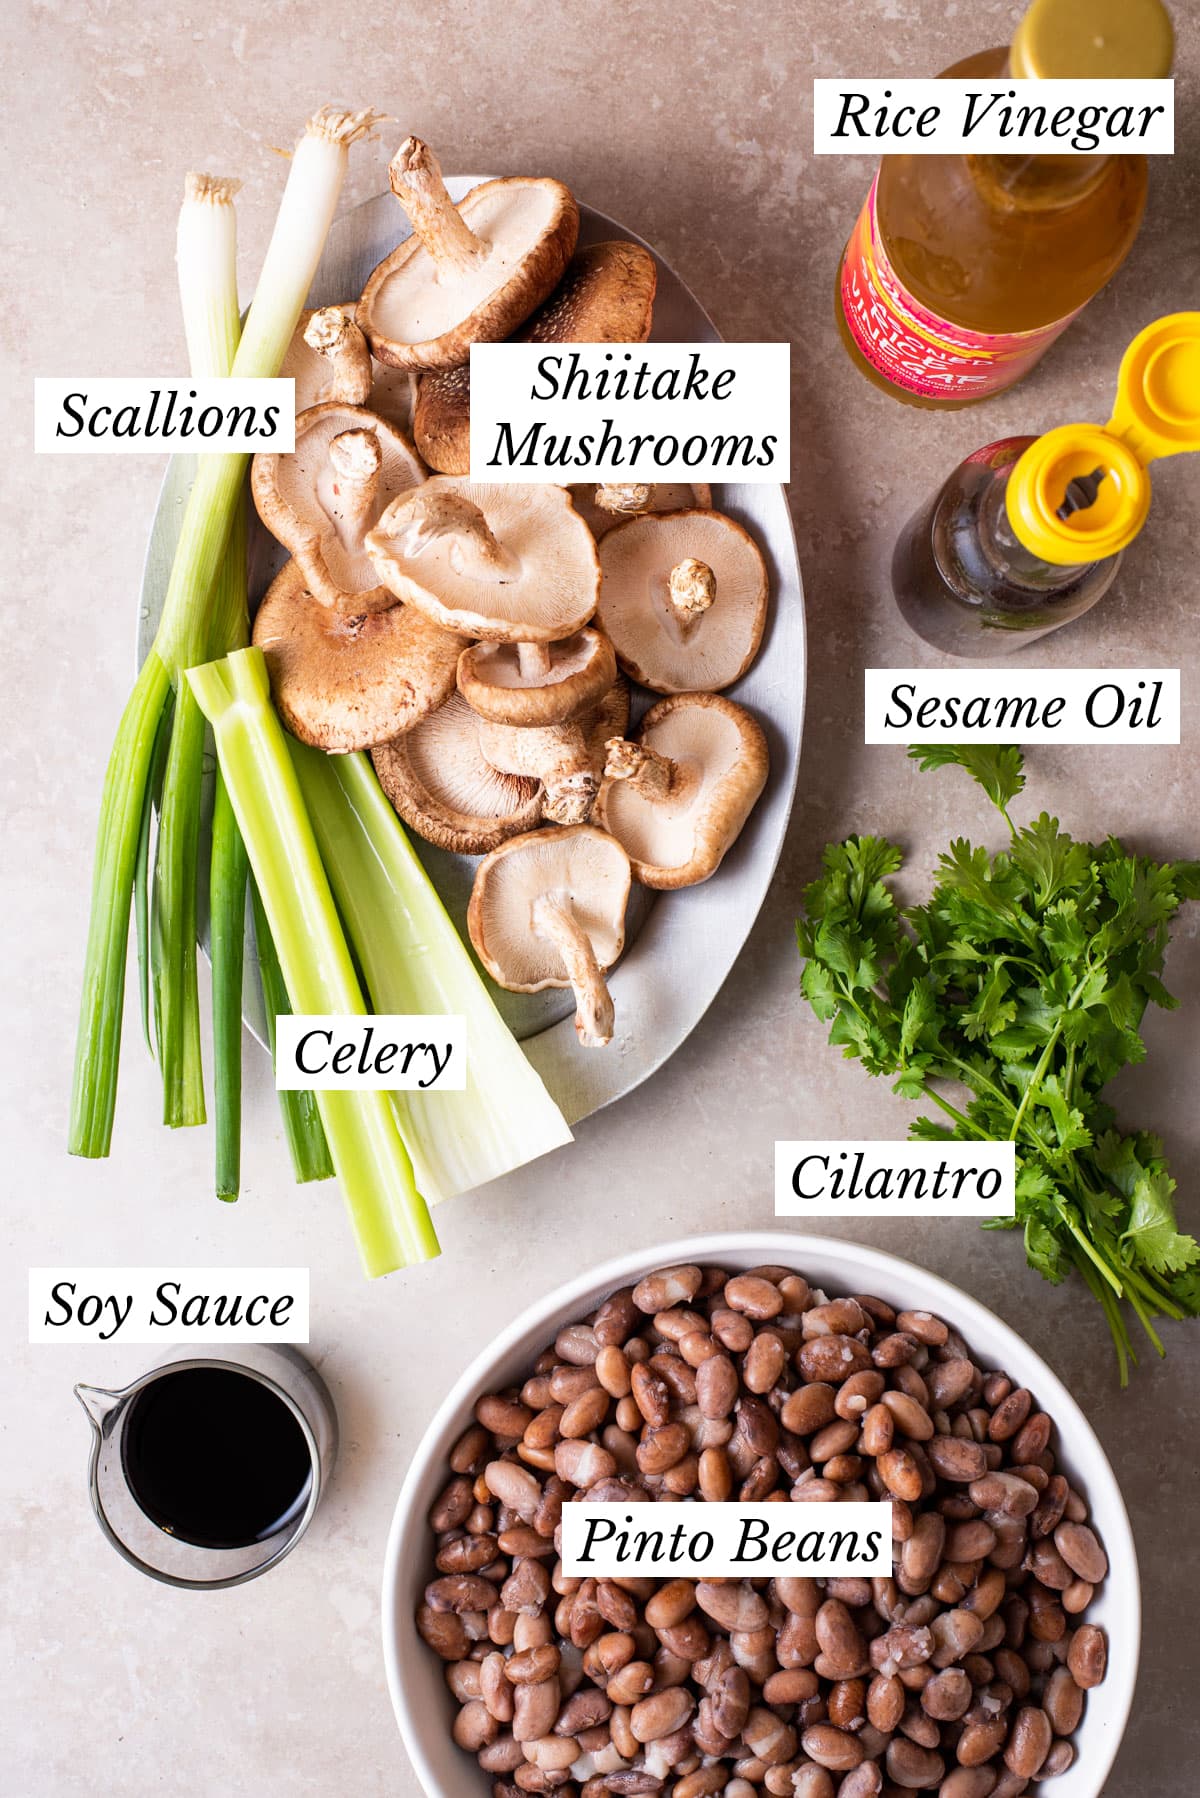 Ingredients gathered to make a pinto bean salad with shiitakes and herbs.